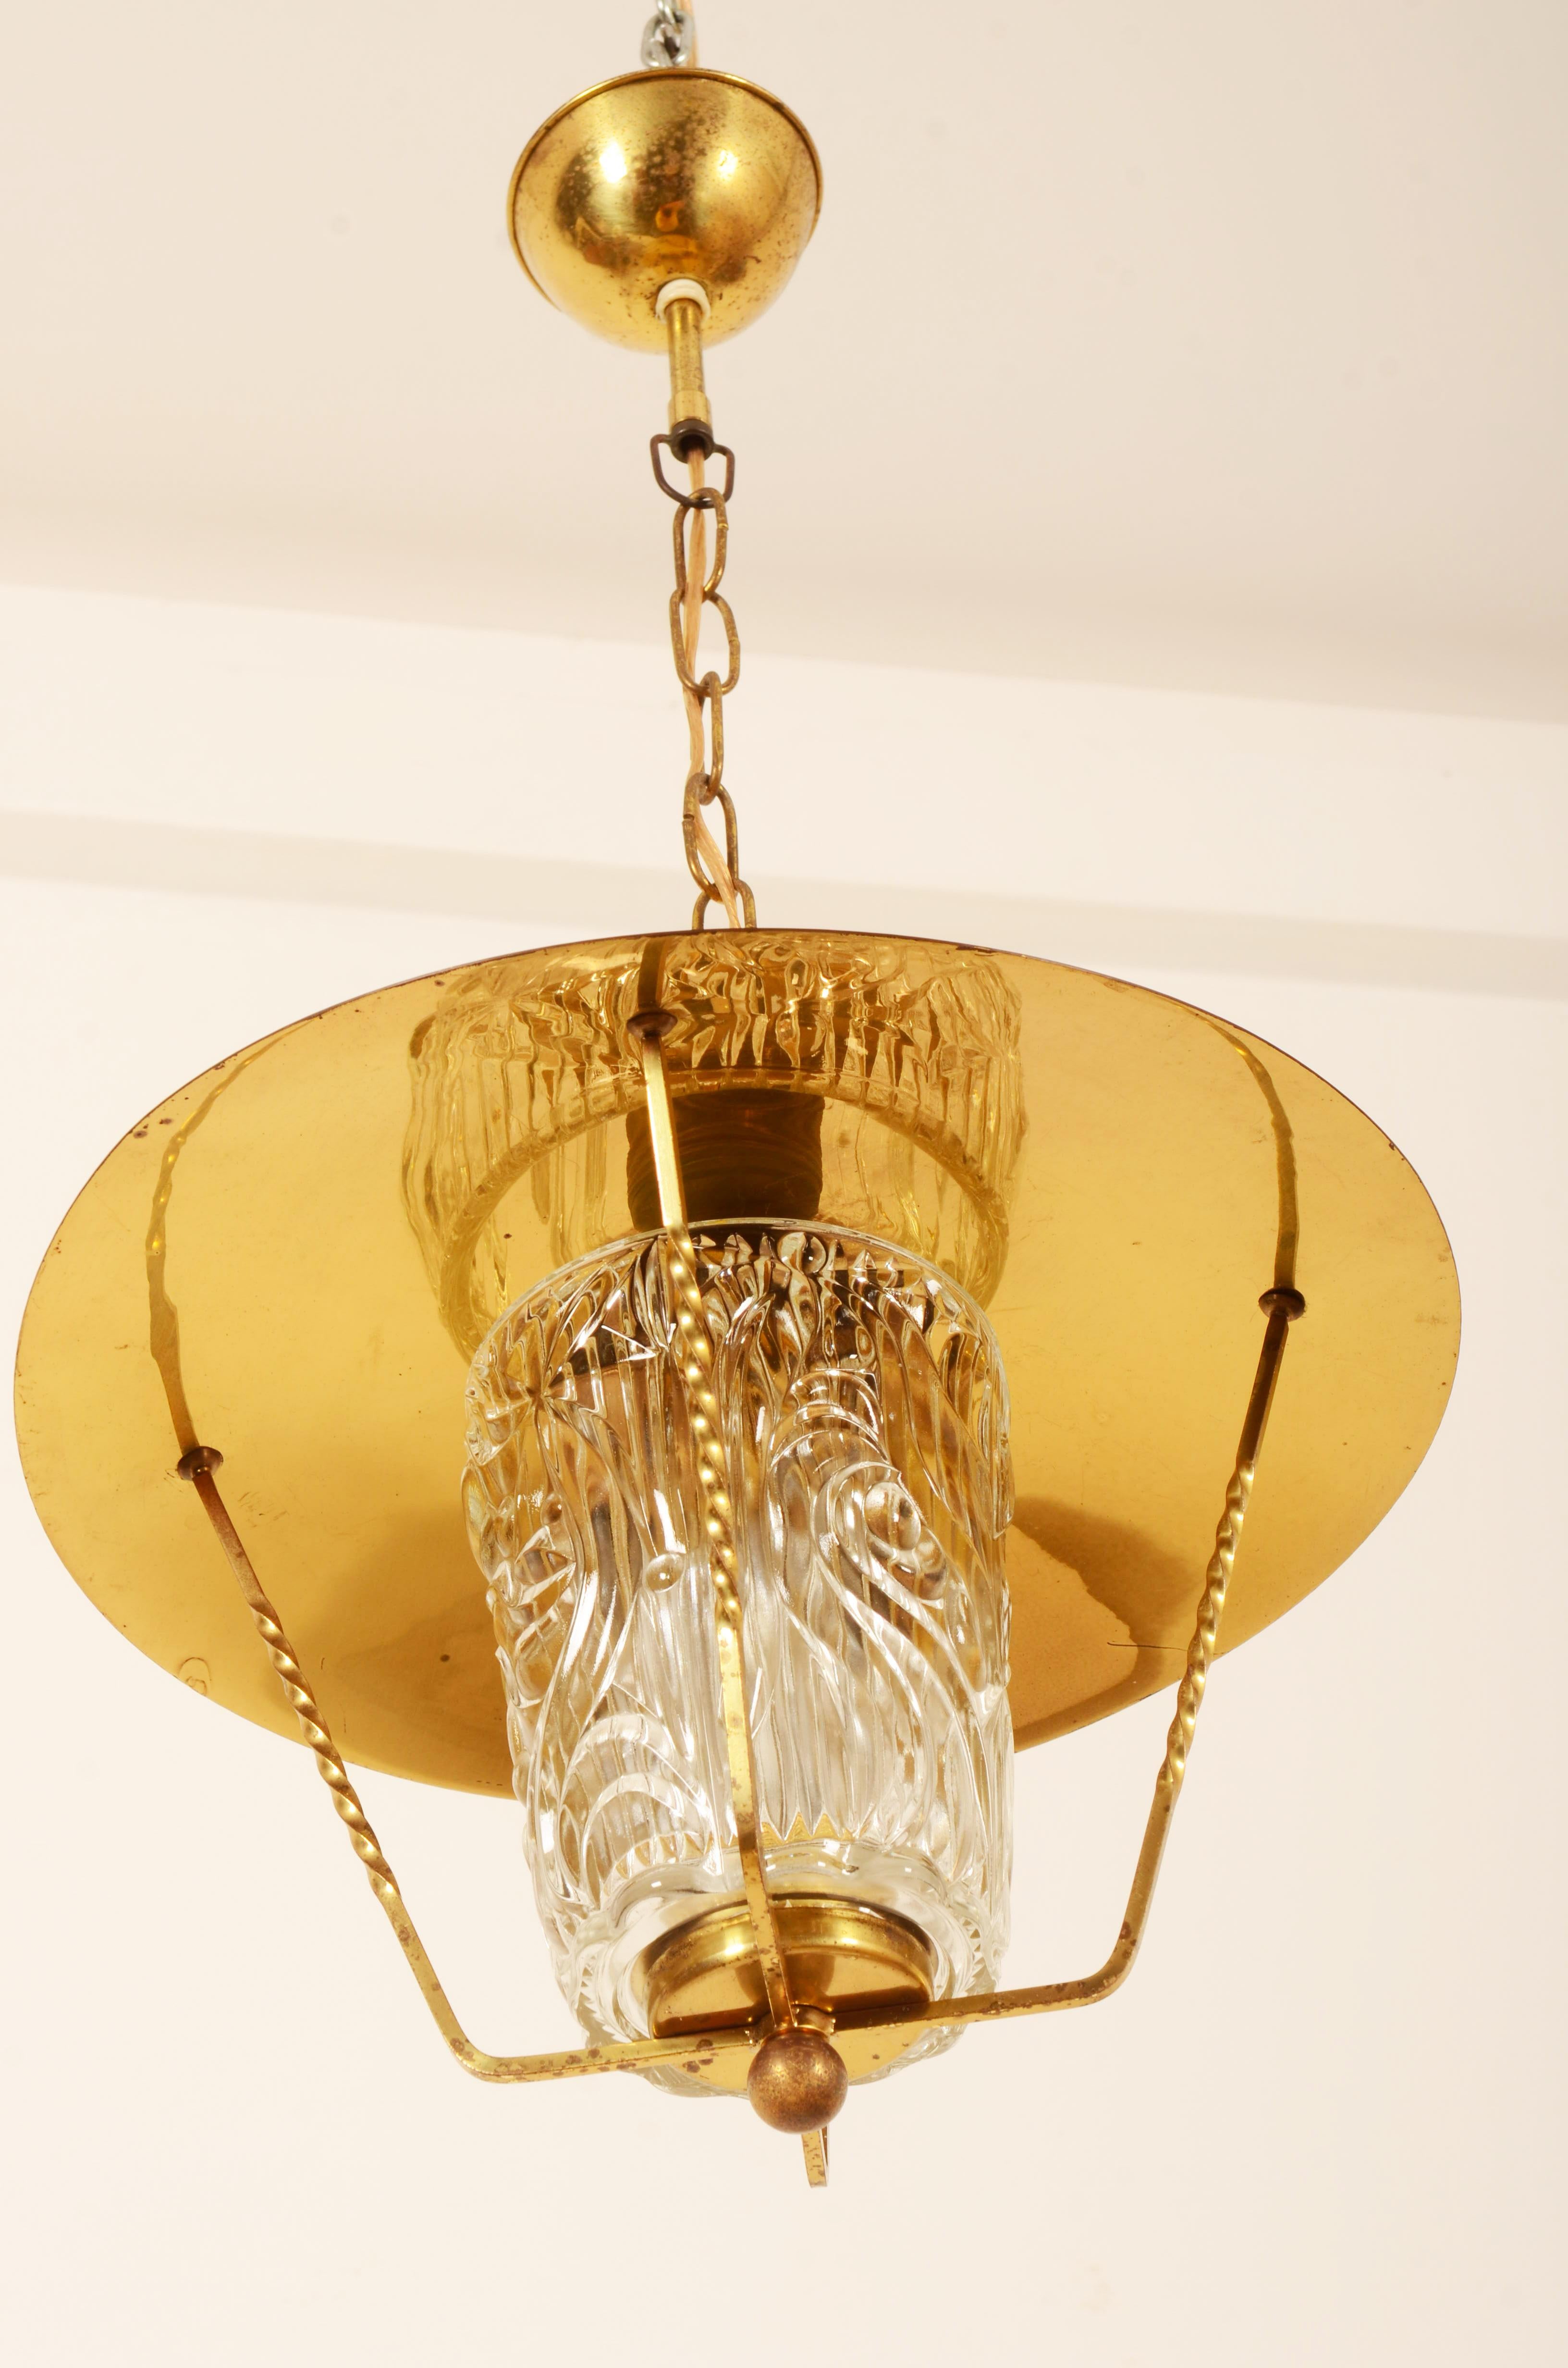 Austrian Midcentury Brass Pendant Lamp With Structured Glass Shade  For Sale